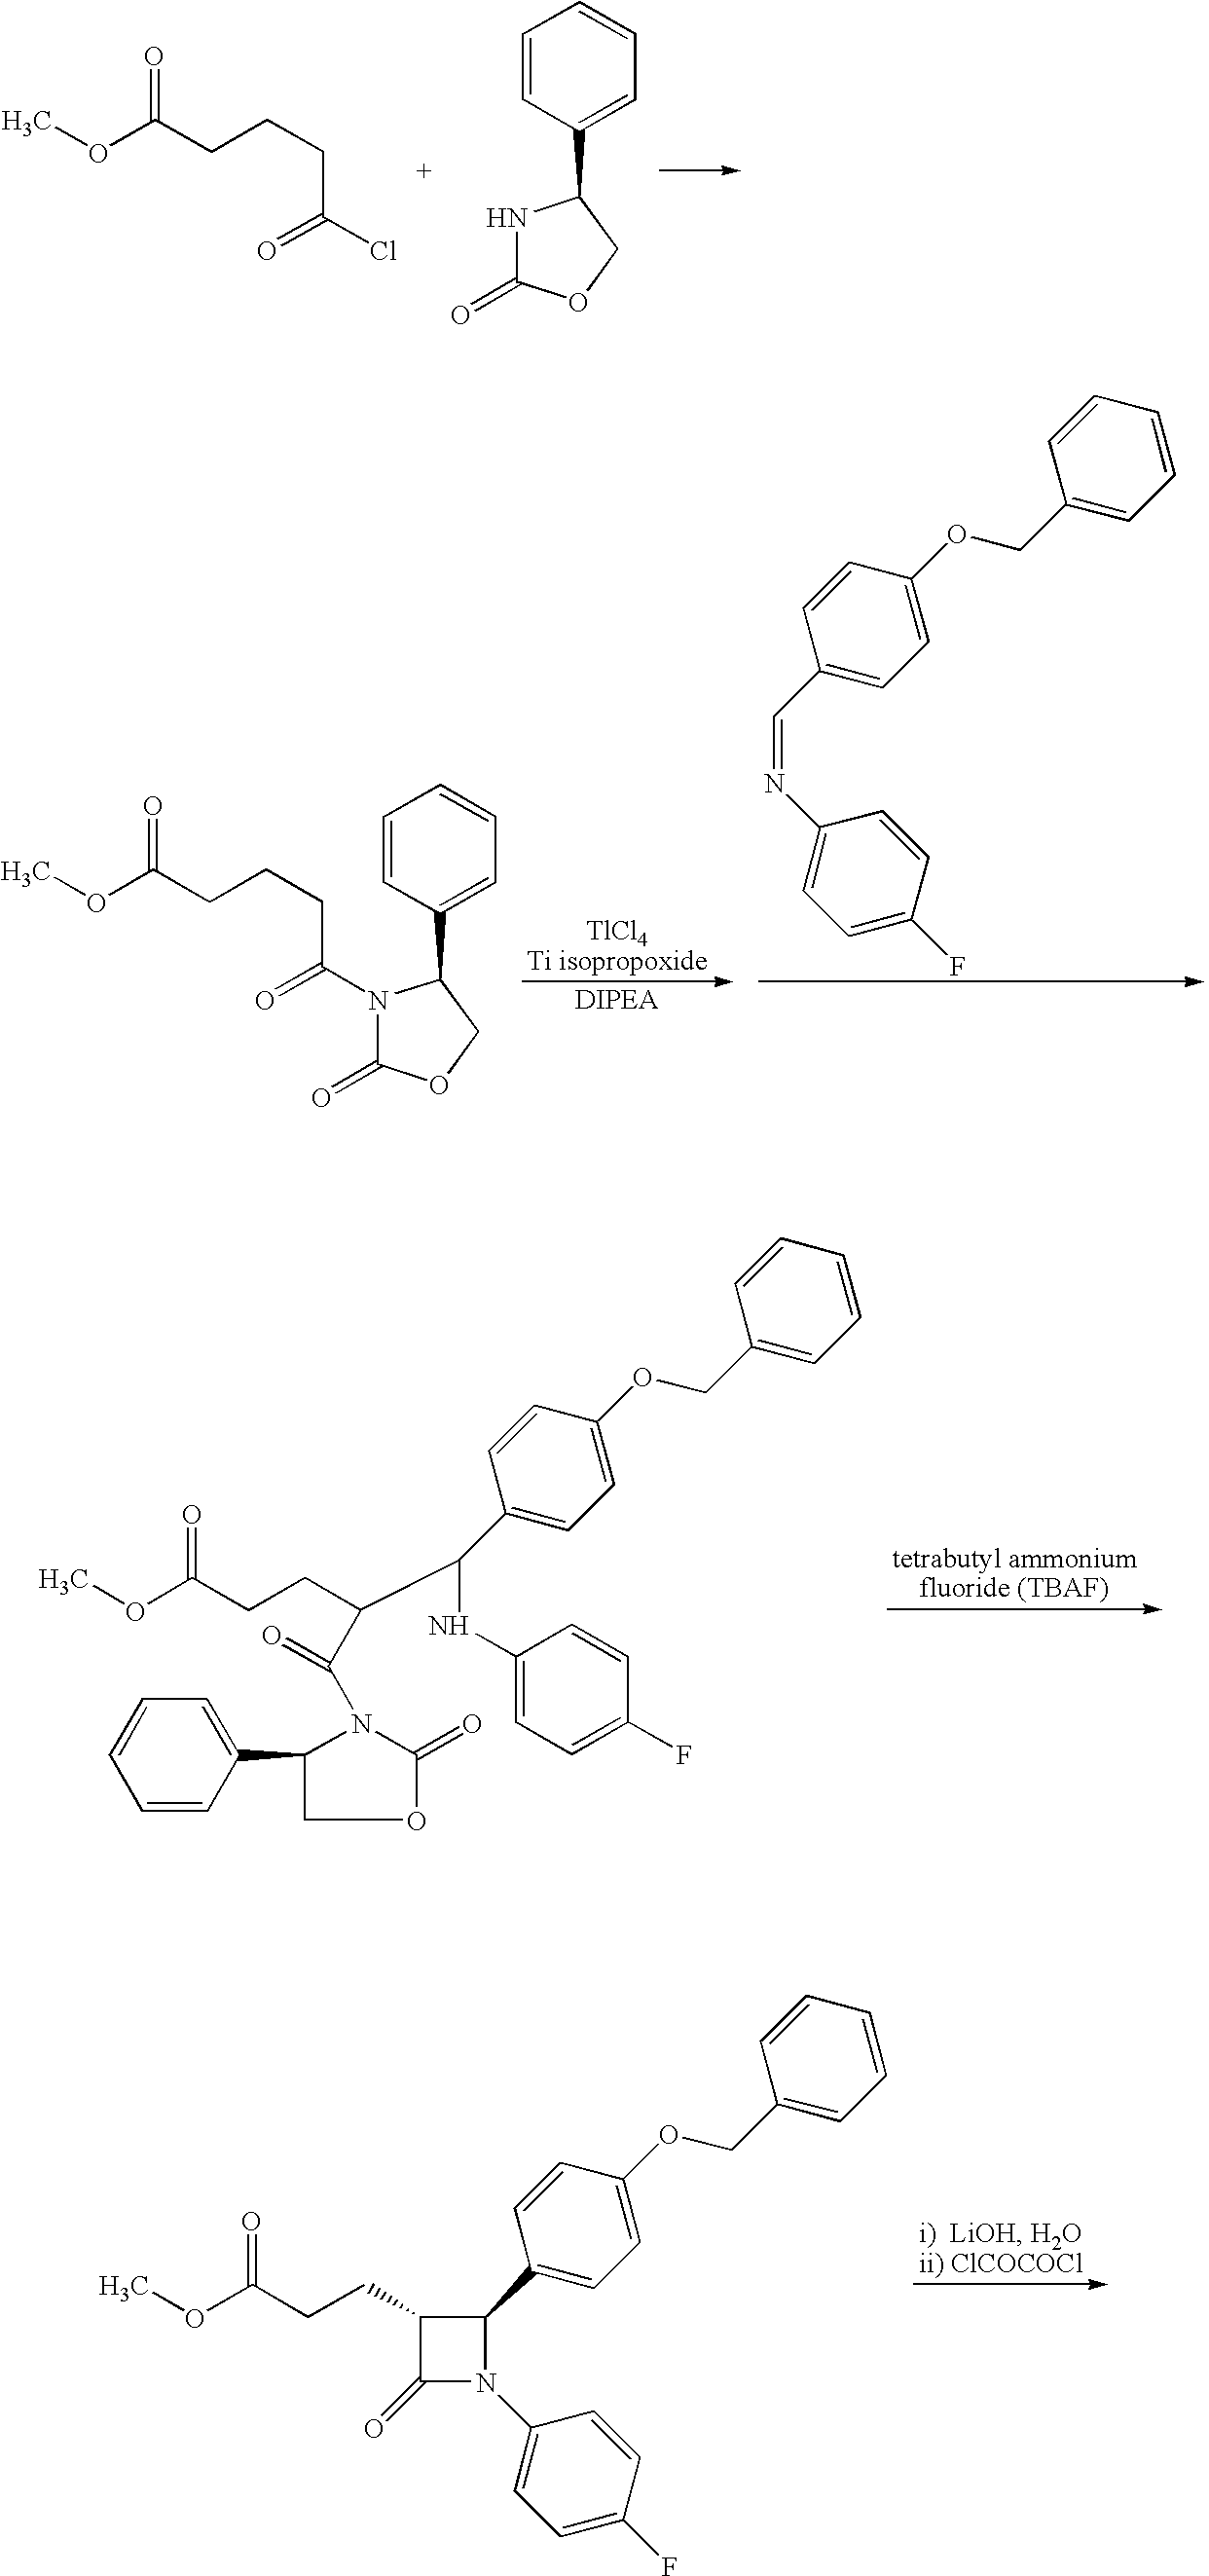 Processes for preparing intermediate compounds useful for the preparation of ezetimibe